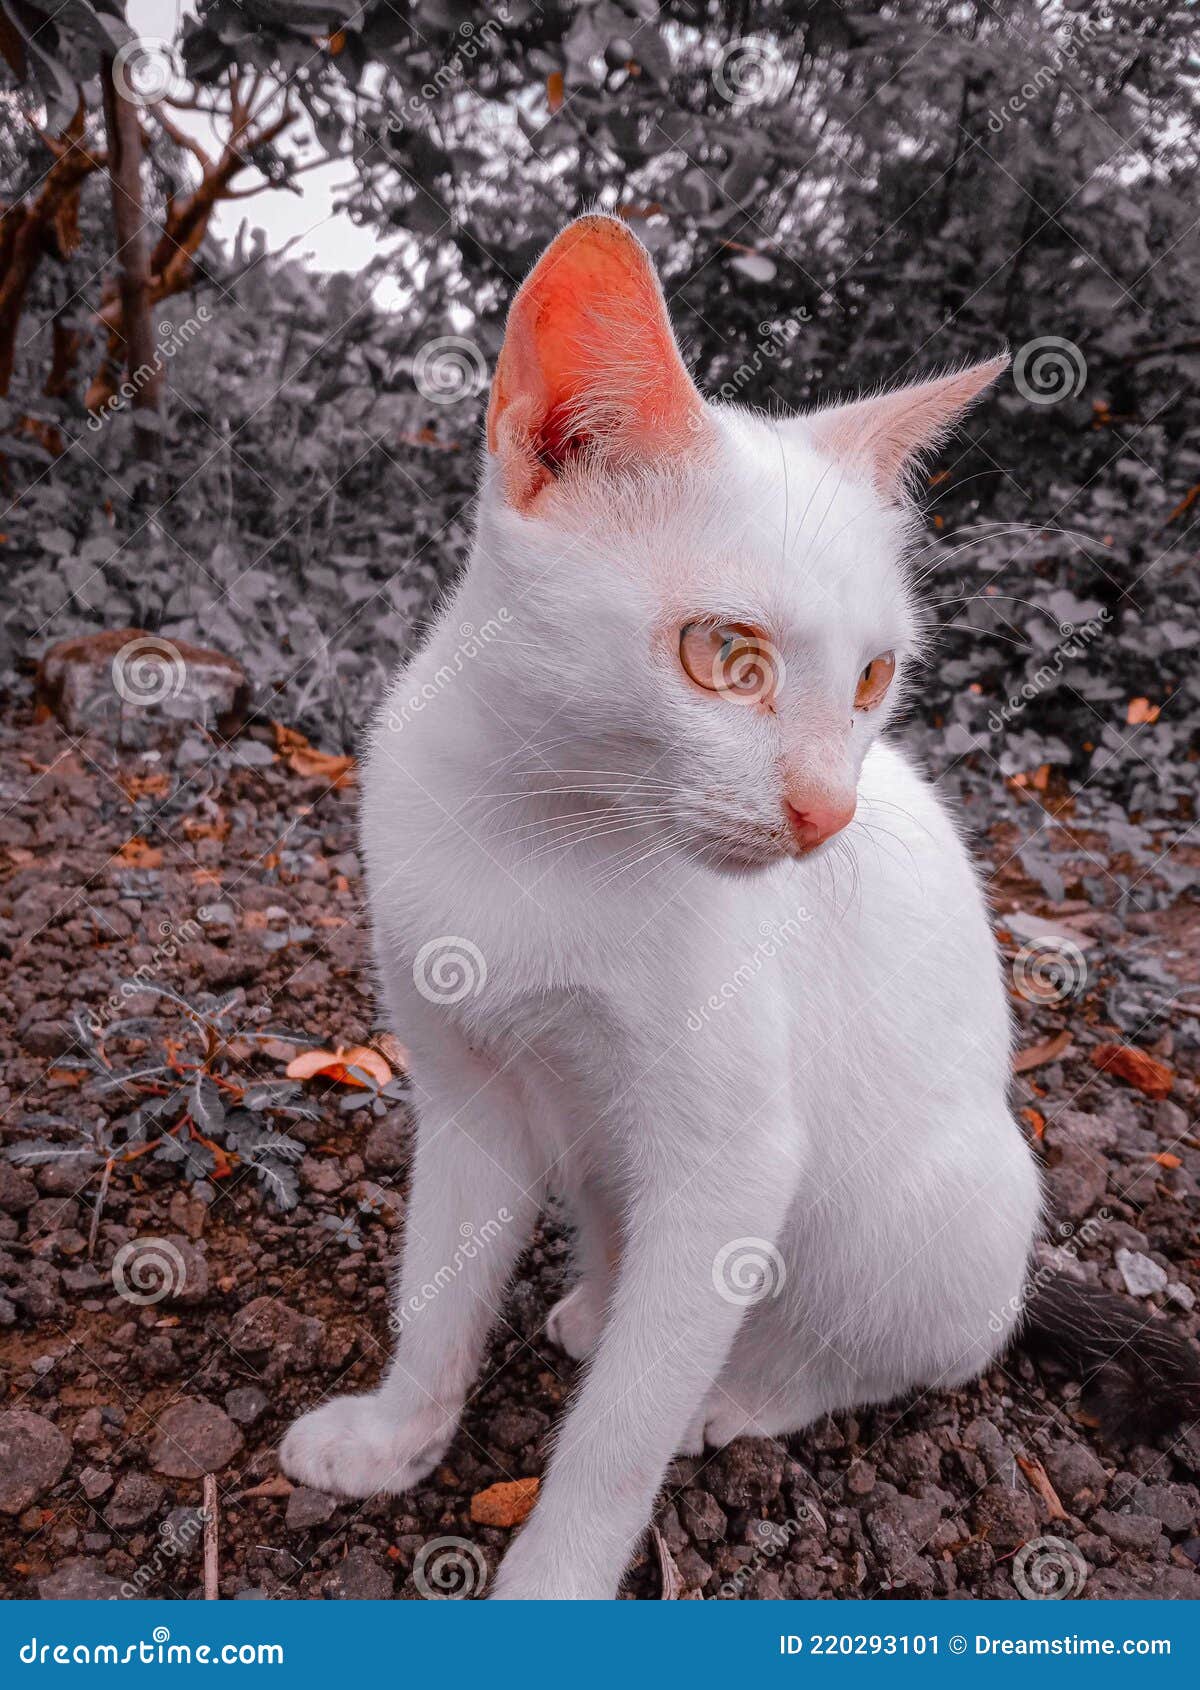 this is white cat,, edit by lightroom preset